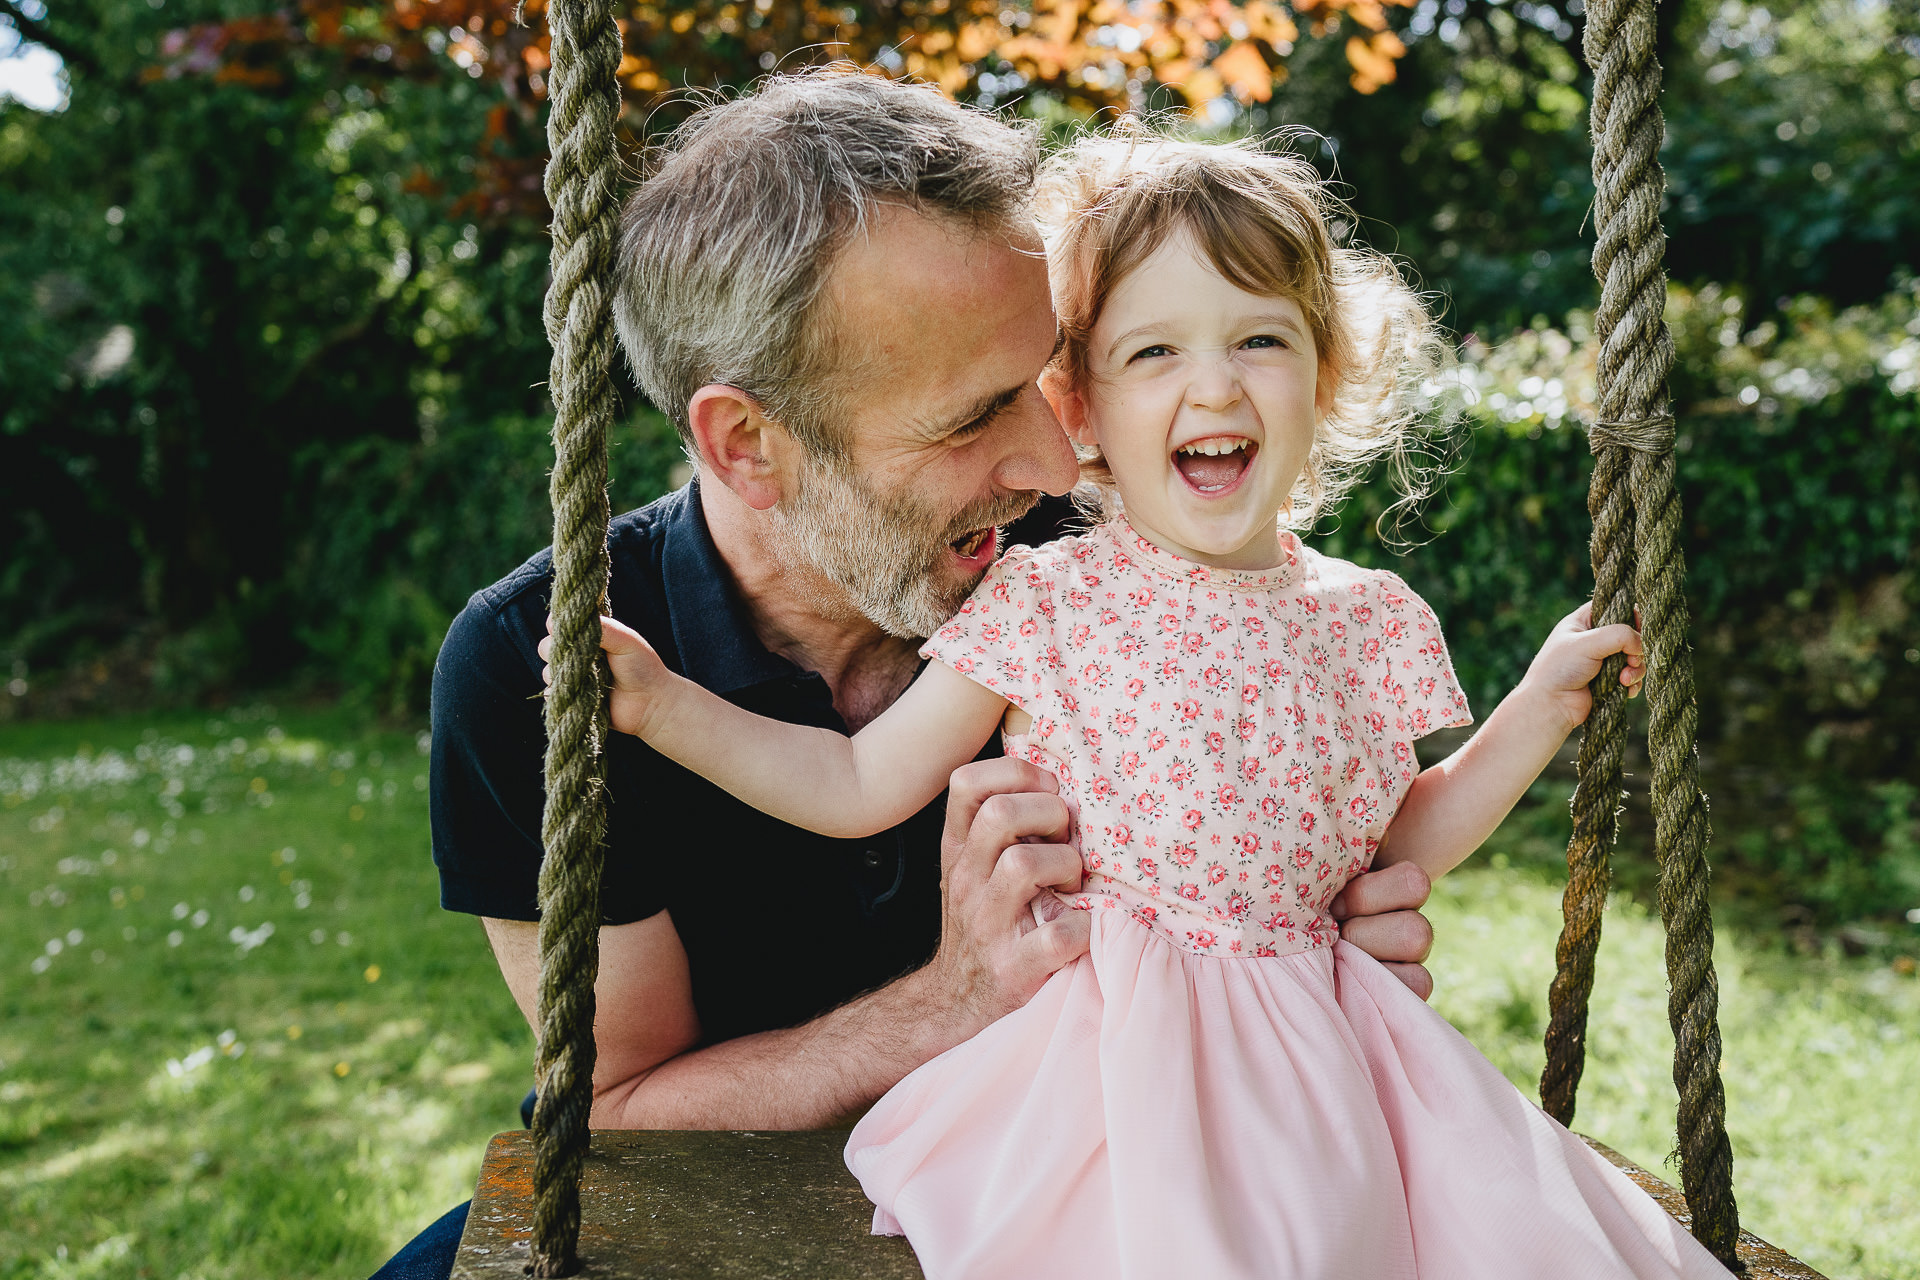 A small girl laughing on a swing with her father